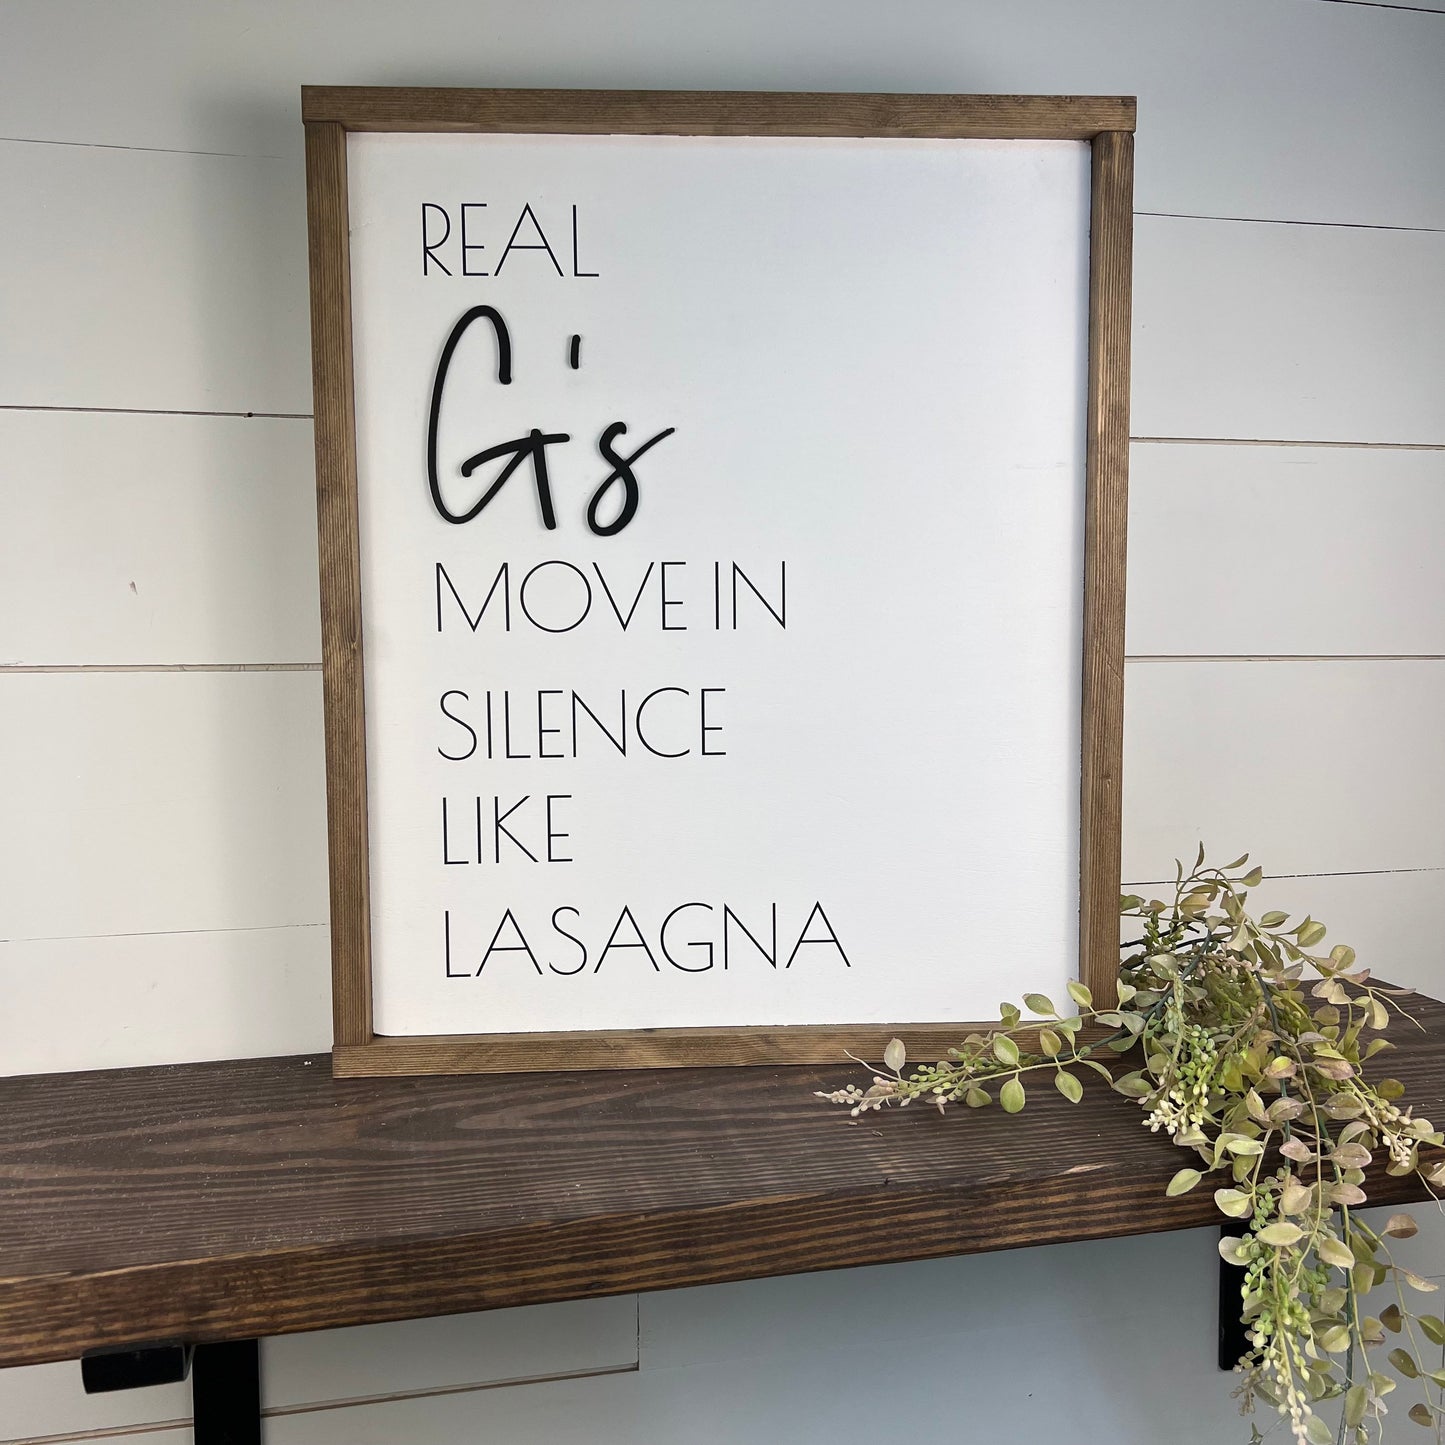 real G’s move in silence like lasagna sign [FREE SHIPPING]